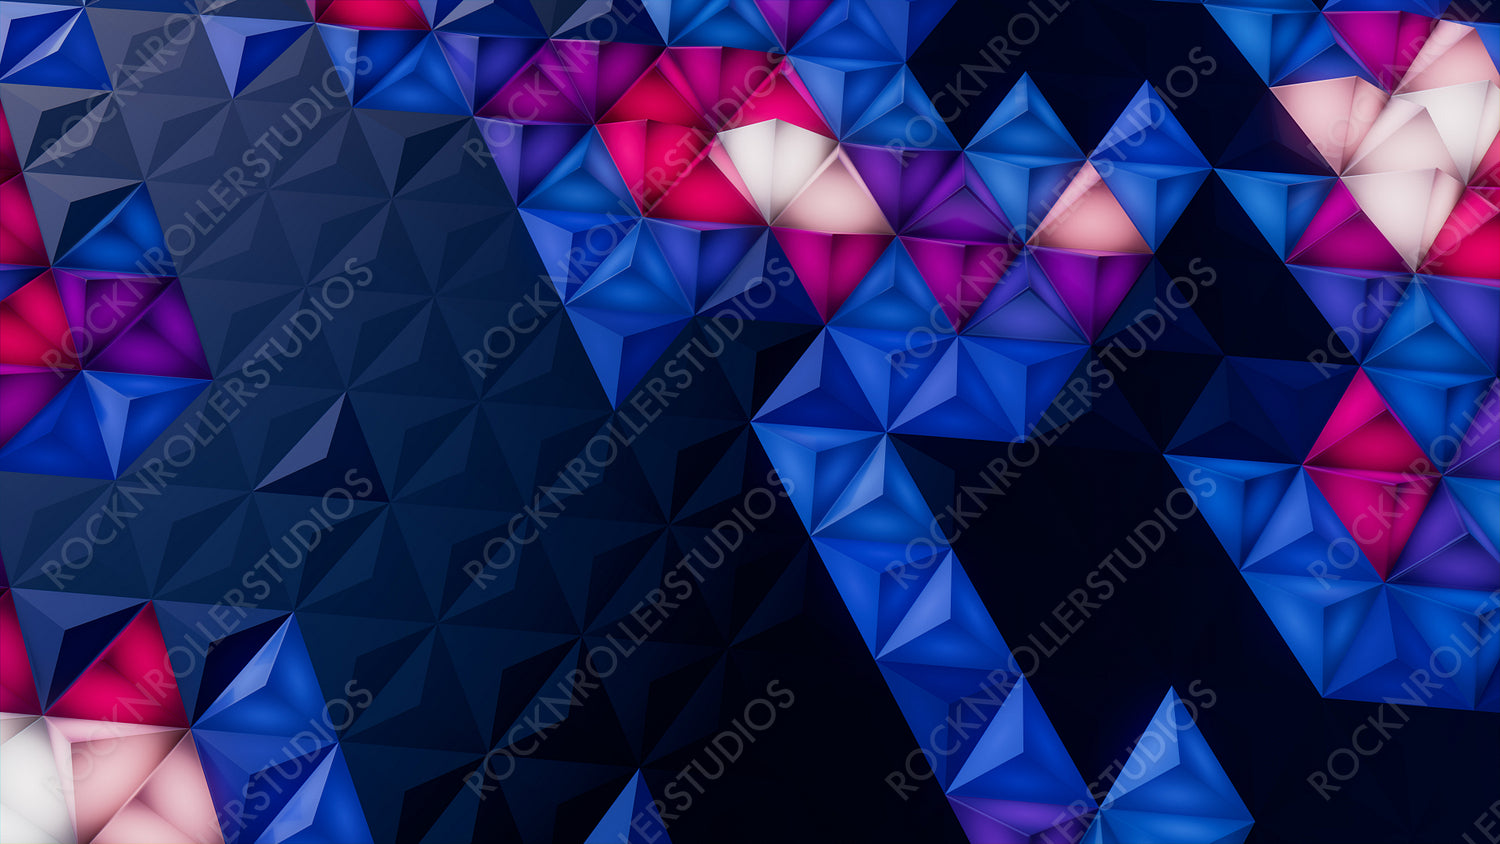 Illuminated, Blue and Pink Three-Dimensional Surface with Tetrahedrons. Futuristic, Colorful 3d Texture.